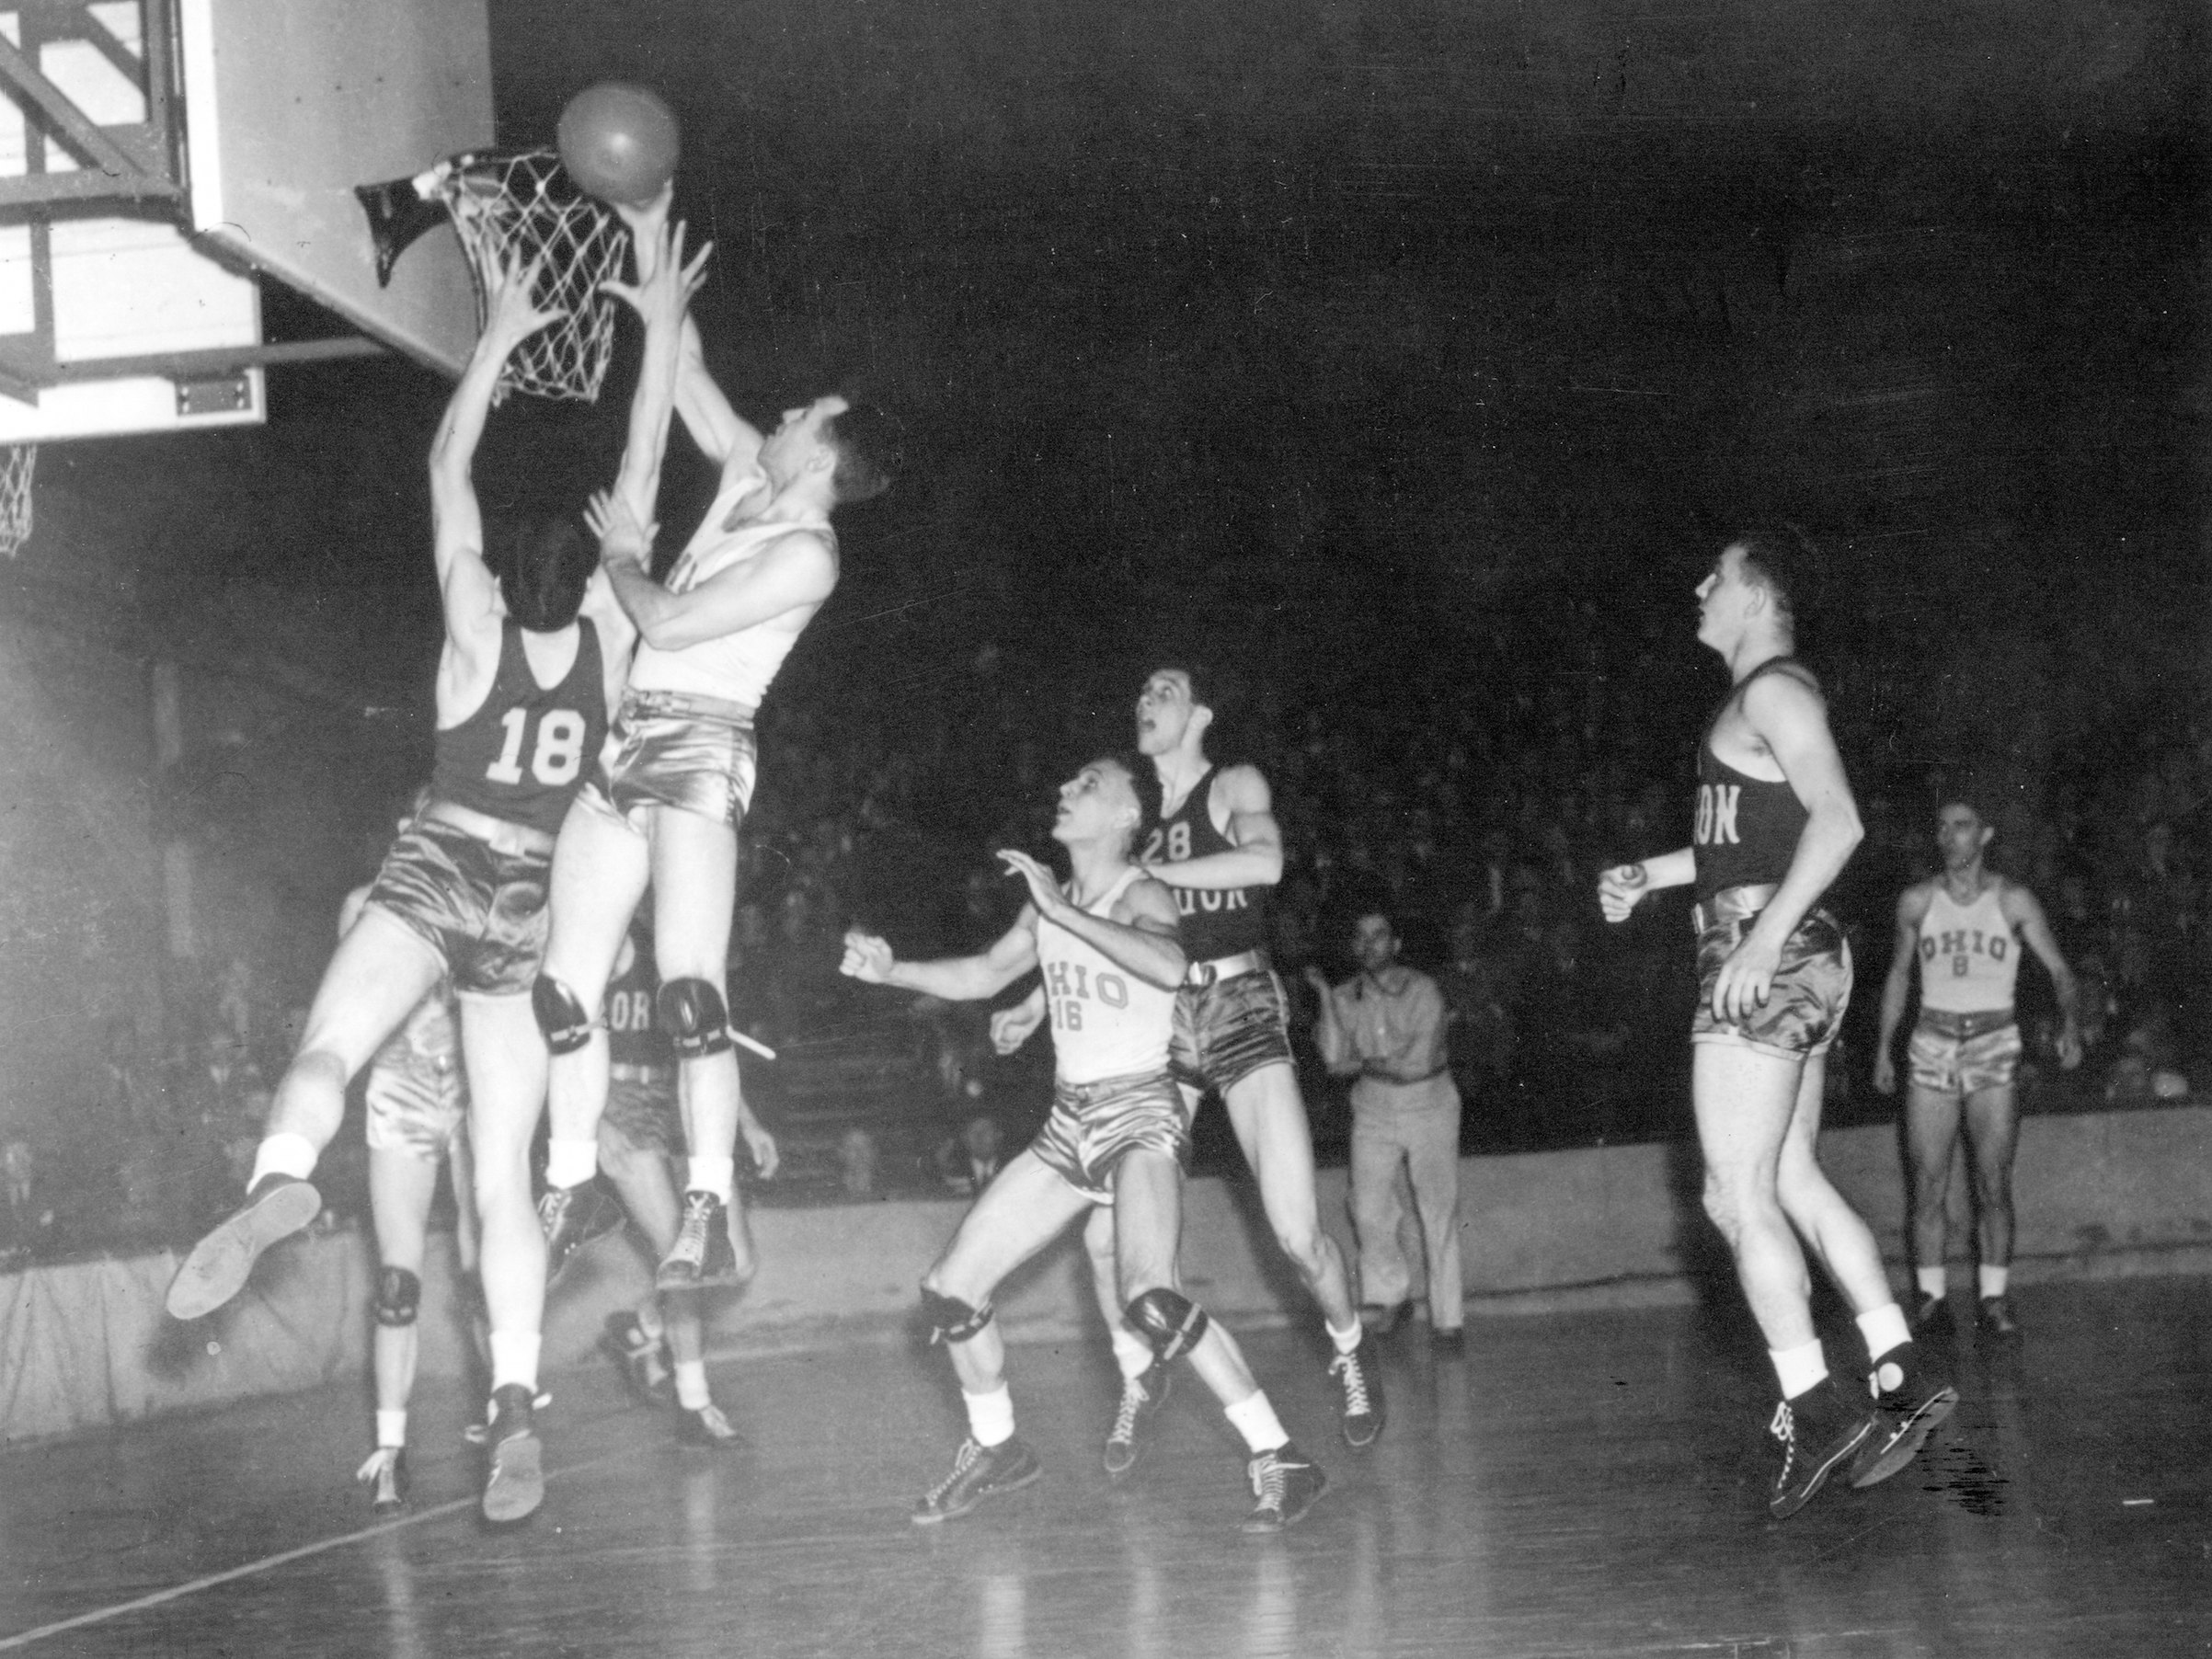 John Schick makes a basket during the first NCAA Men's Basketball National Championship game held in Evanston, Ill., on Mar. 27, 1939. (NCAA Photos/Getty Images)